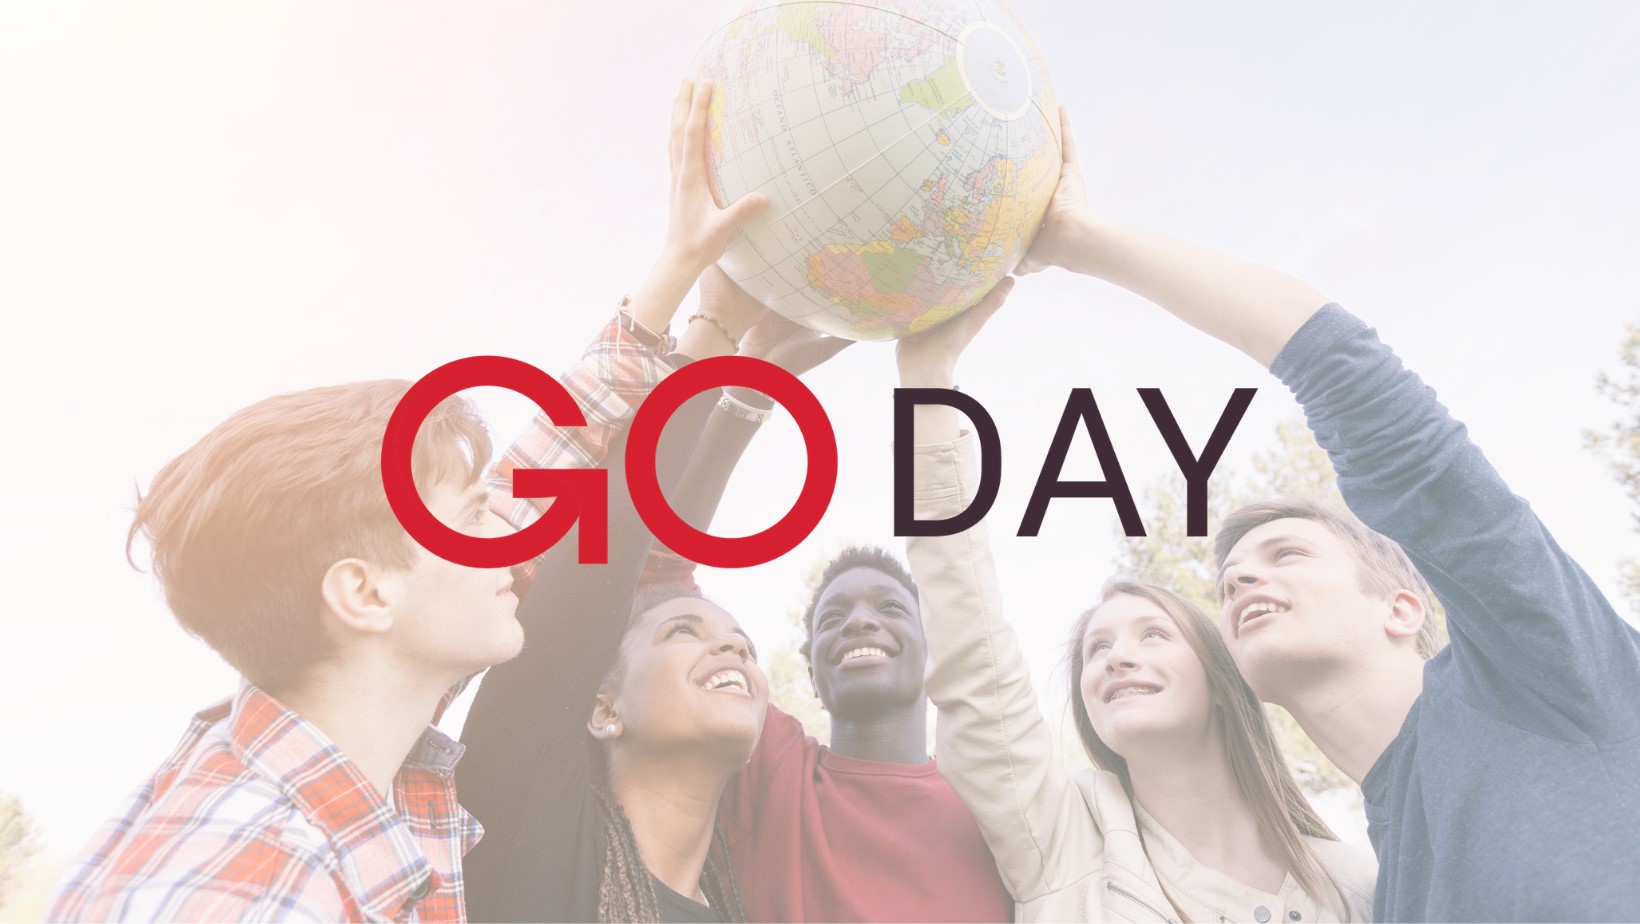 An estimated 50 million Christians worldwide are sharing their faith on the 10th anniversary of Global Outreach Day, now GO Day, on May 29th